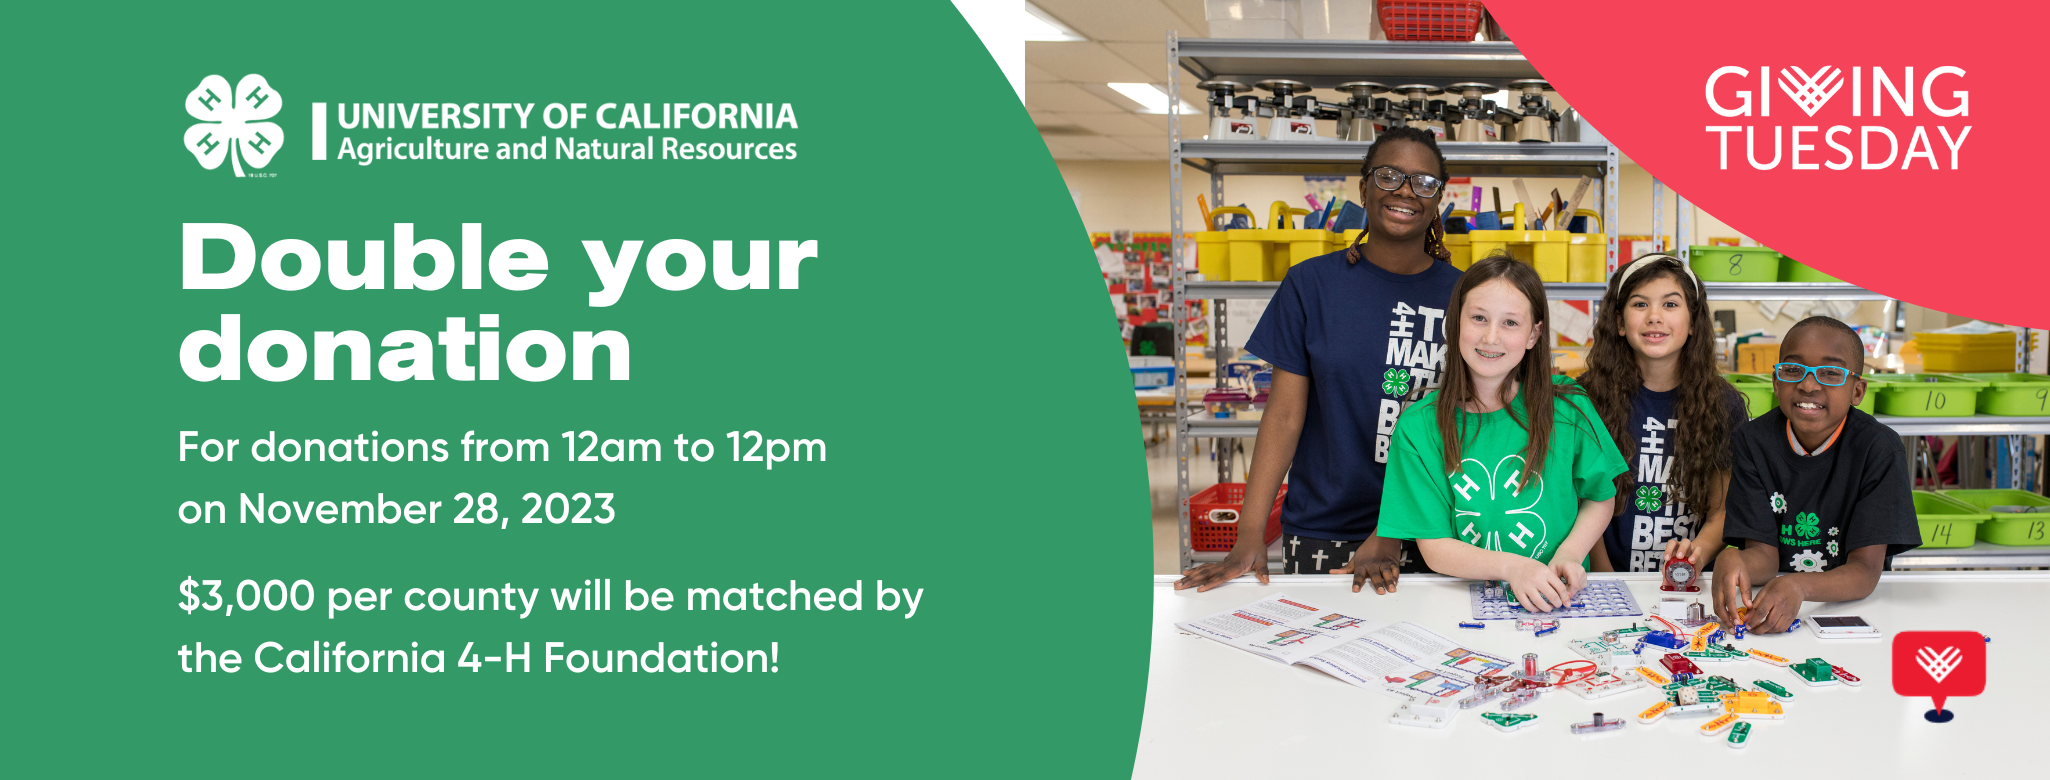 Double your donation-for donations from 12am to 12pm on Nov 28, 2023.
$3,000 per county will be matched by the California 4-H Foundation